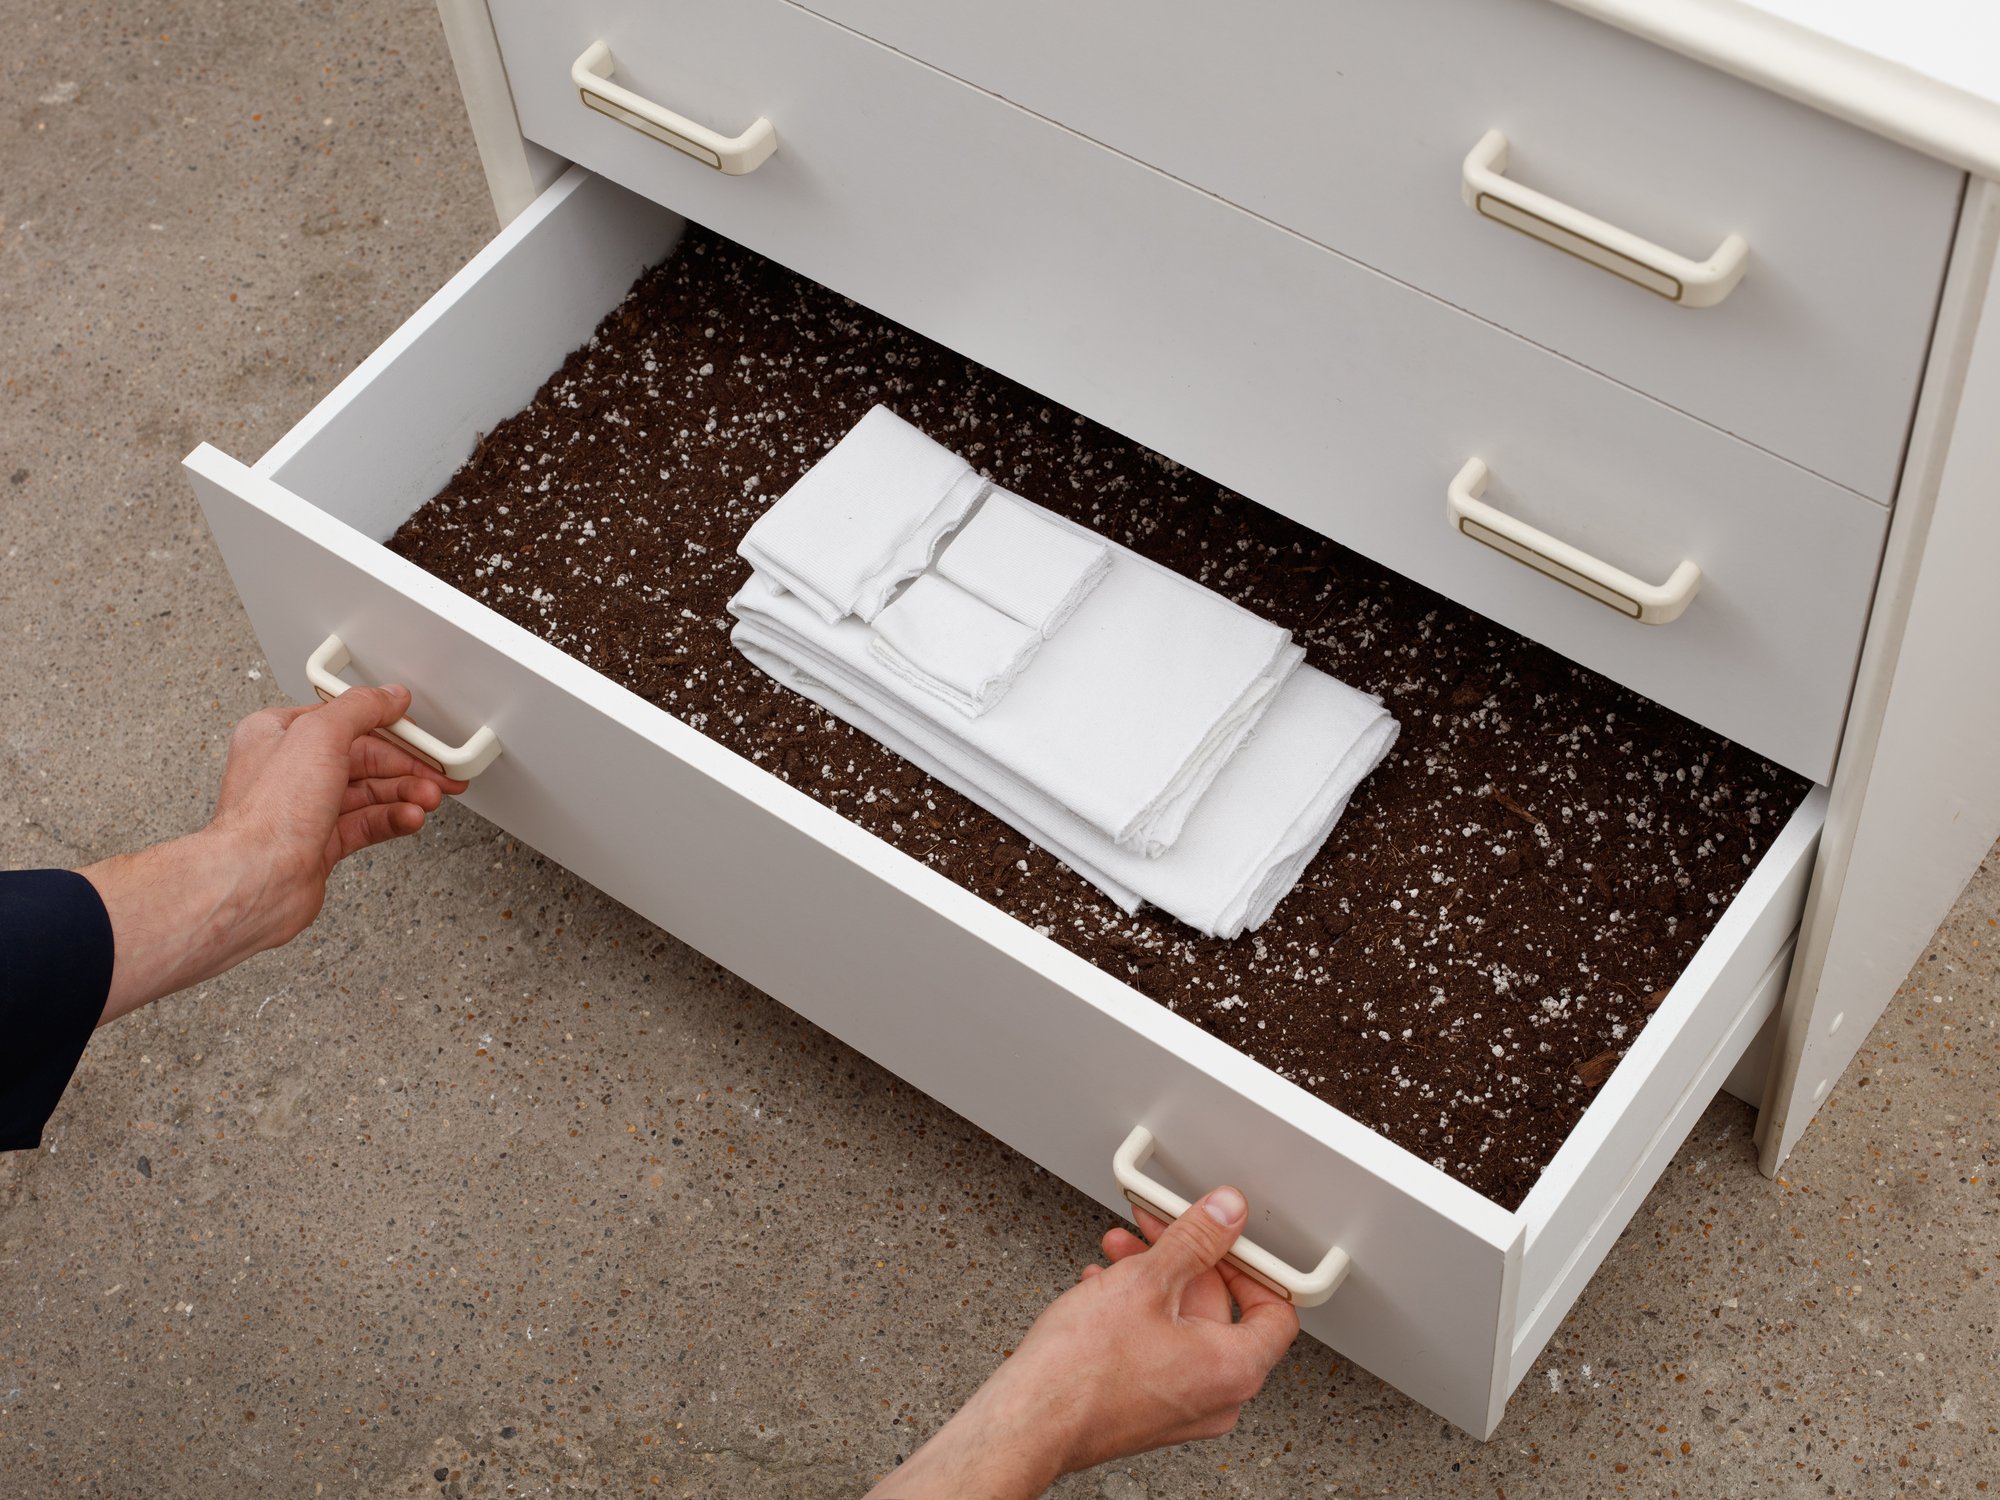 Ian Law, untitled, chest of drawers, ceramic by Marianne Measures (1970-2010), potting soil, unpicked t-shirts, 69 x 76.5 x 40 cm (27 1/8 x 30 1/8 x 15 3/4 in), 2020